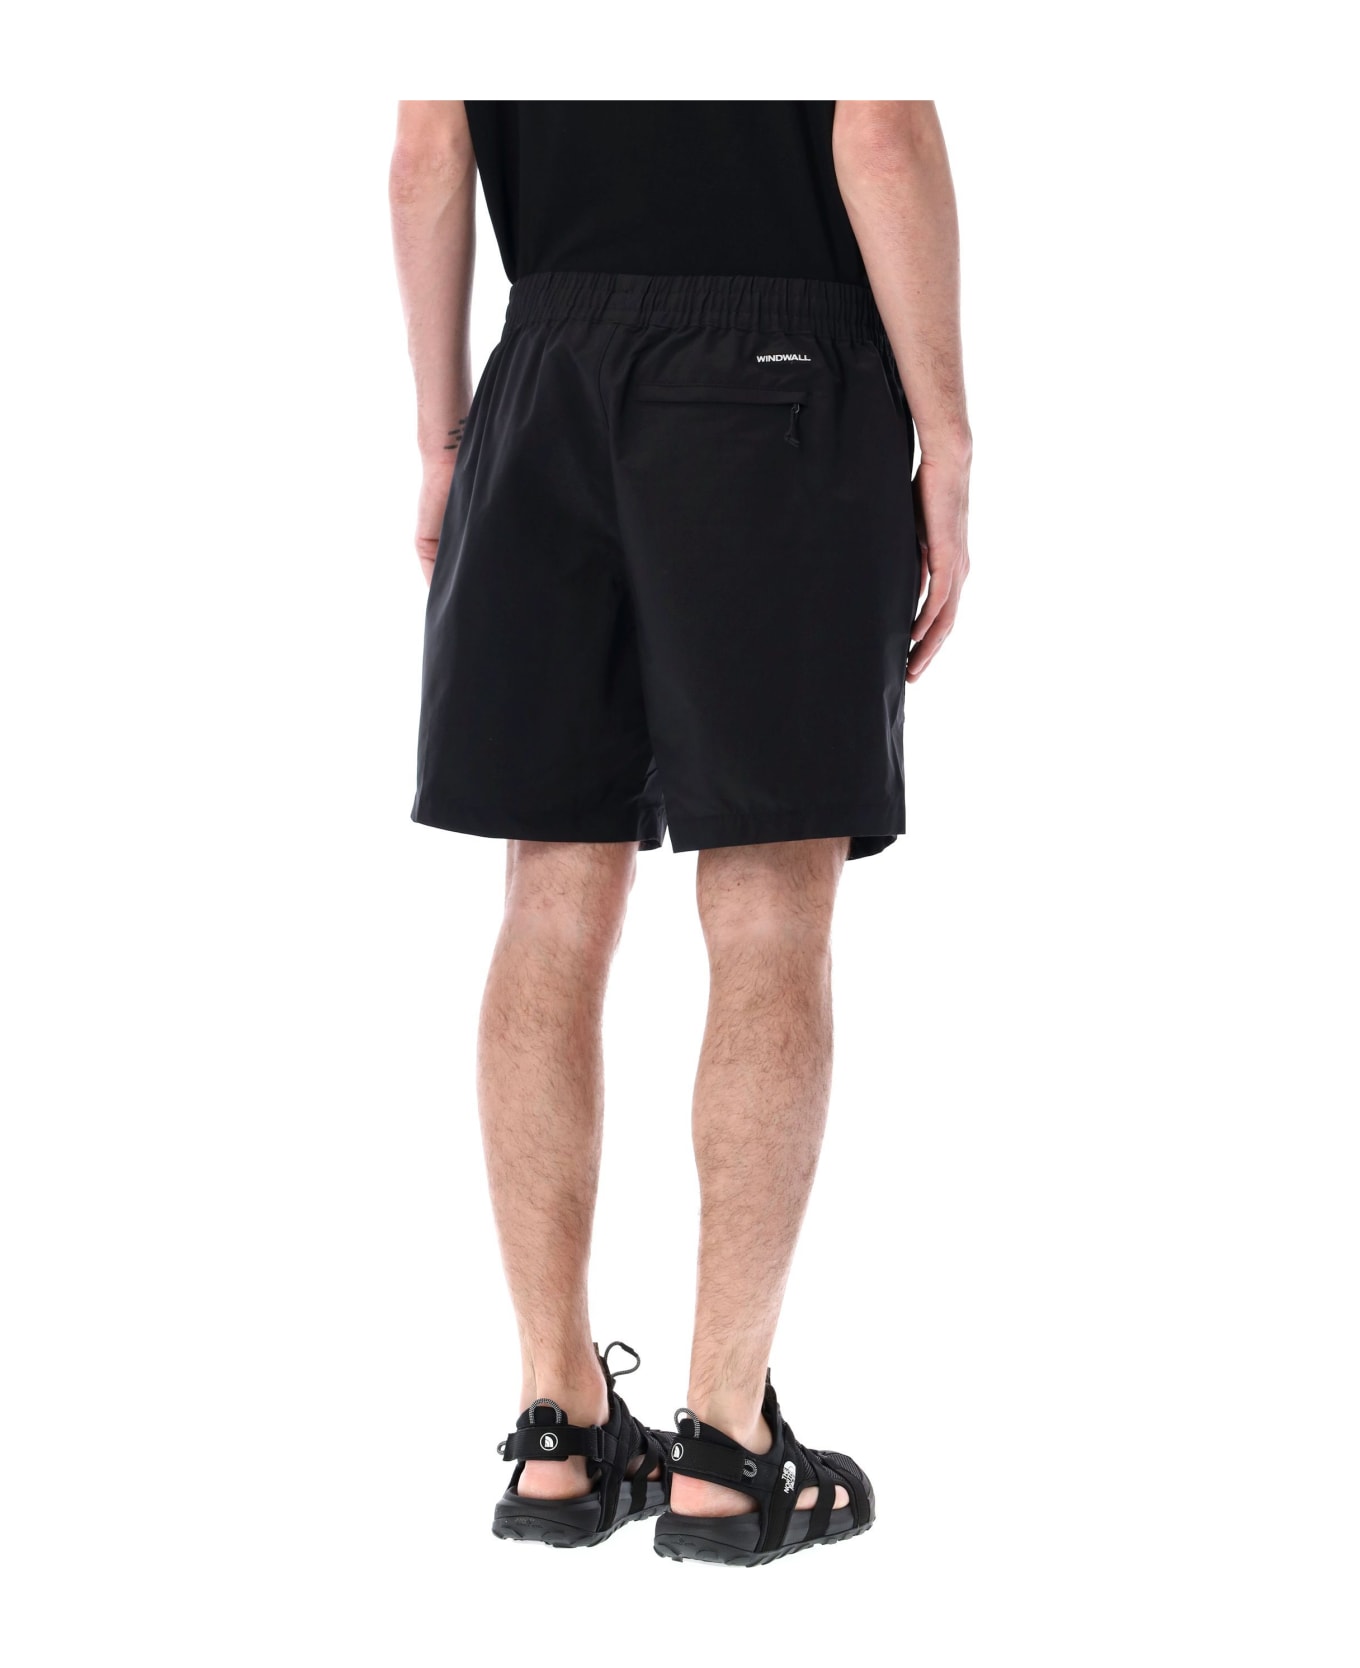 The North Face Easy Wind Shorts - BLACK